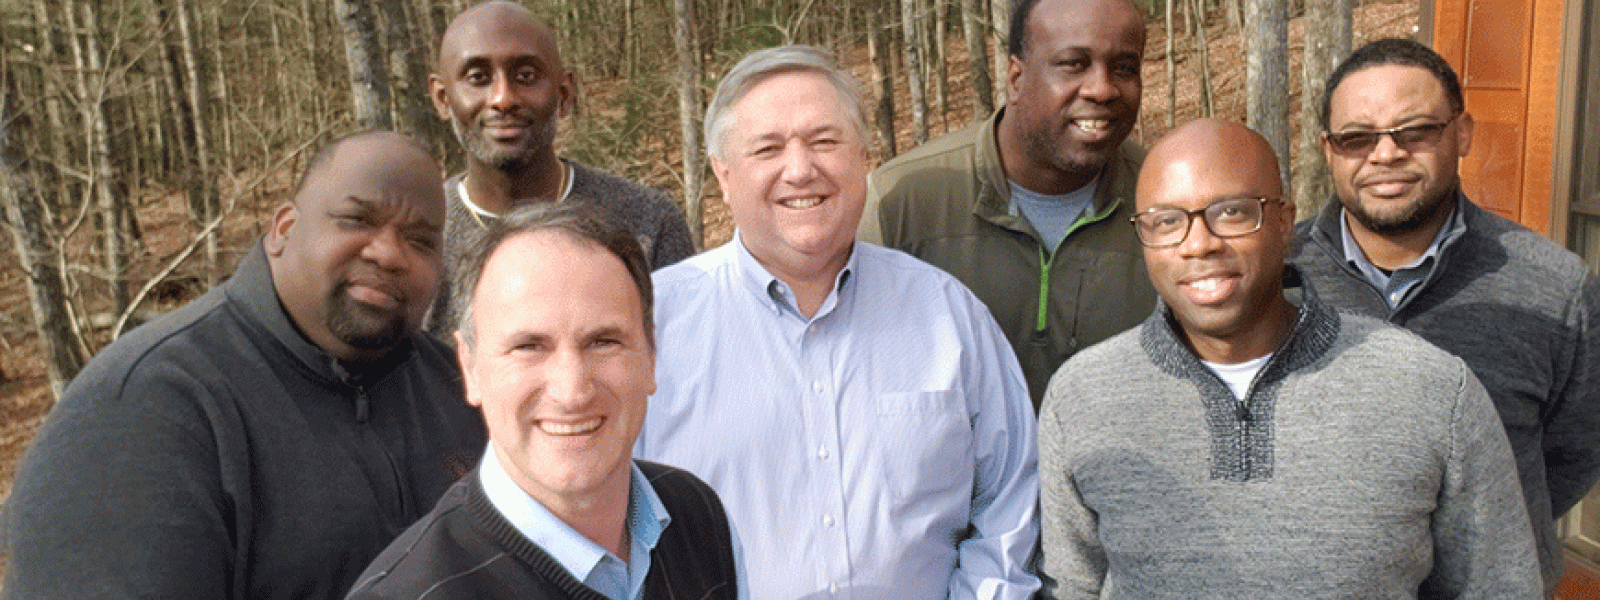 CIU President Dr. Mark Smith (center) meets with CIU African-American leaders at retreat. They are joined by The Rev. David Spivey, pastor of Haven of Rest Bible Church in Galax, Virginia